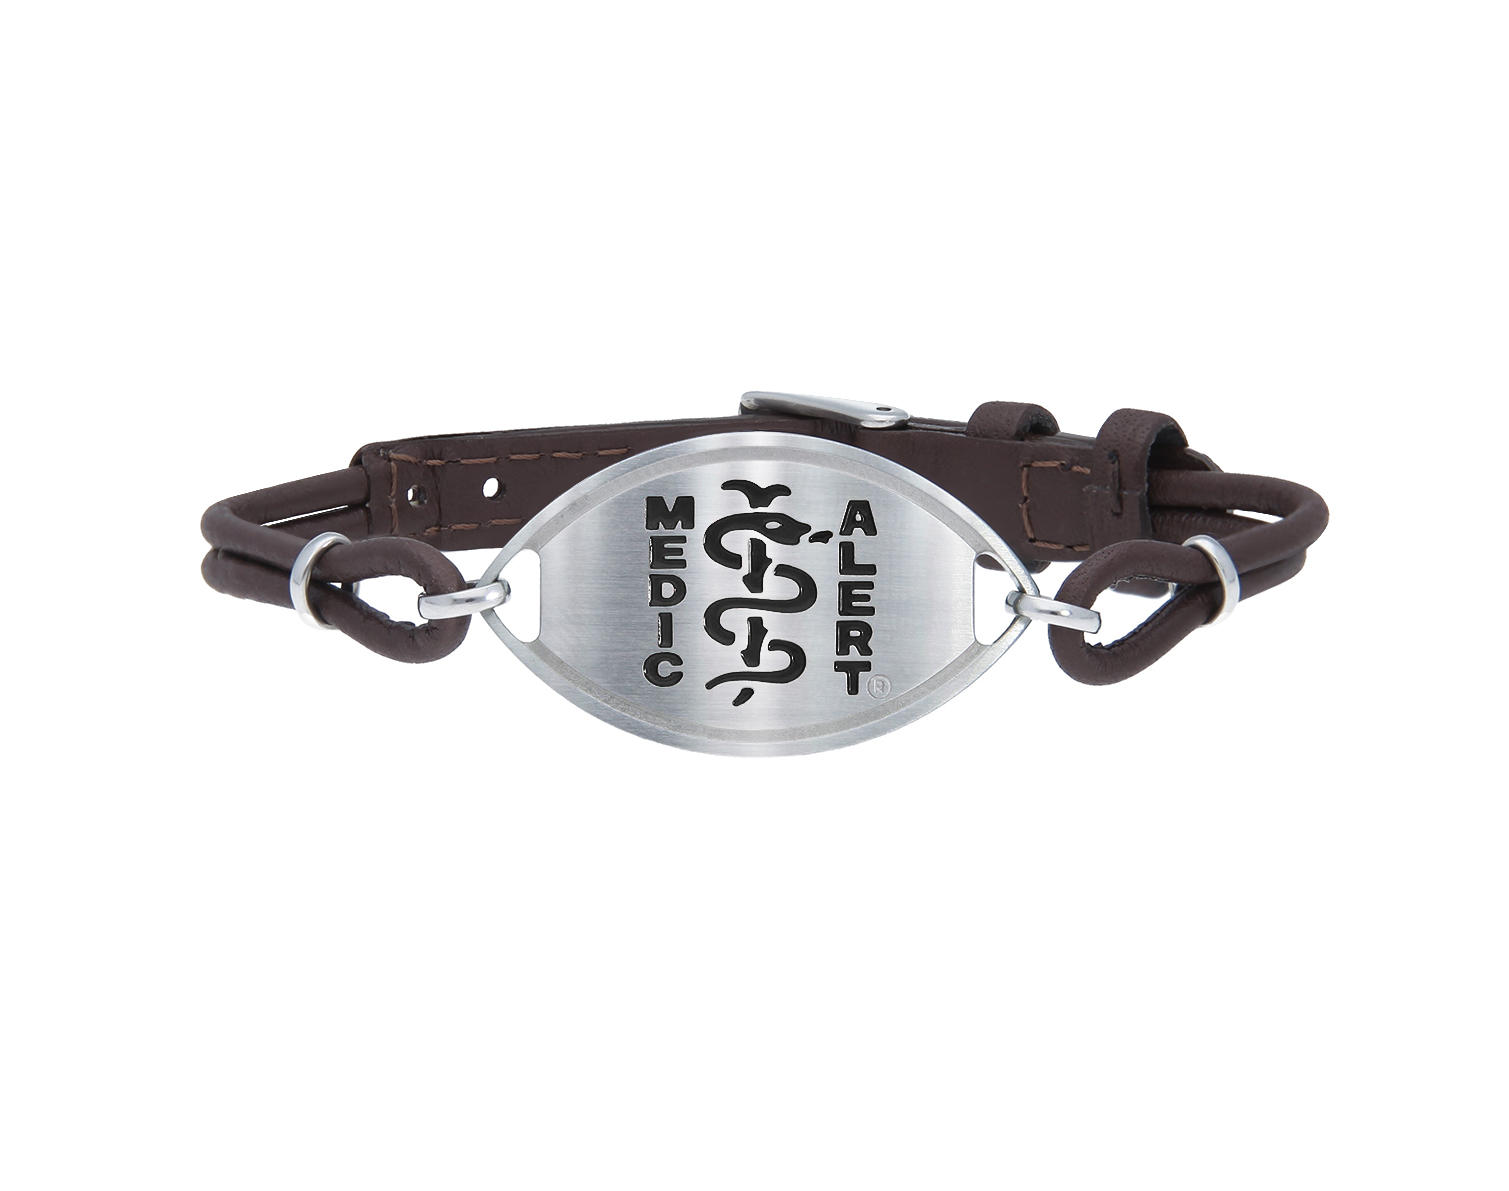 Brown leather strap for wrist with metal elliptical disc with a black MedicAlert logo which includes the universal medical sign of a snake wrapped around a rod